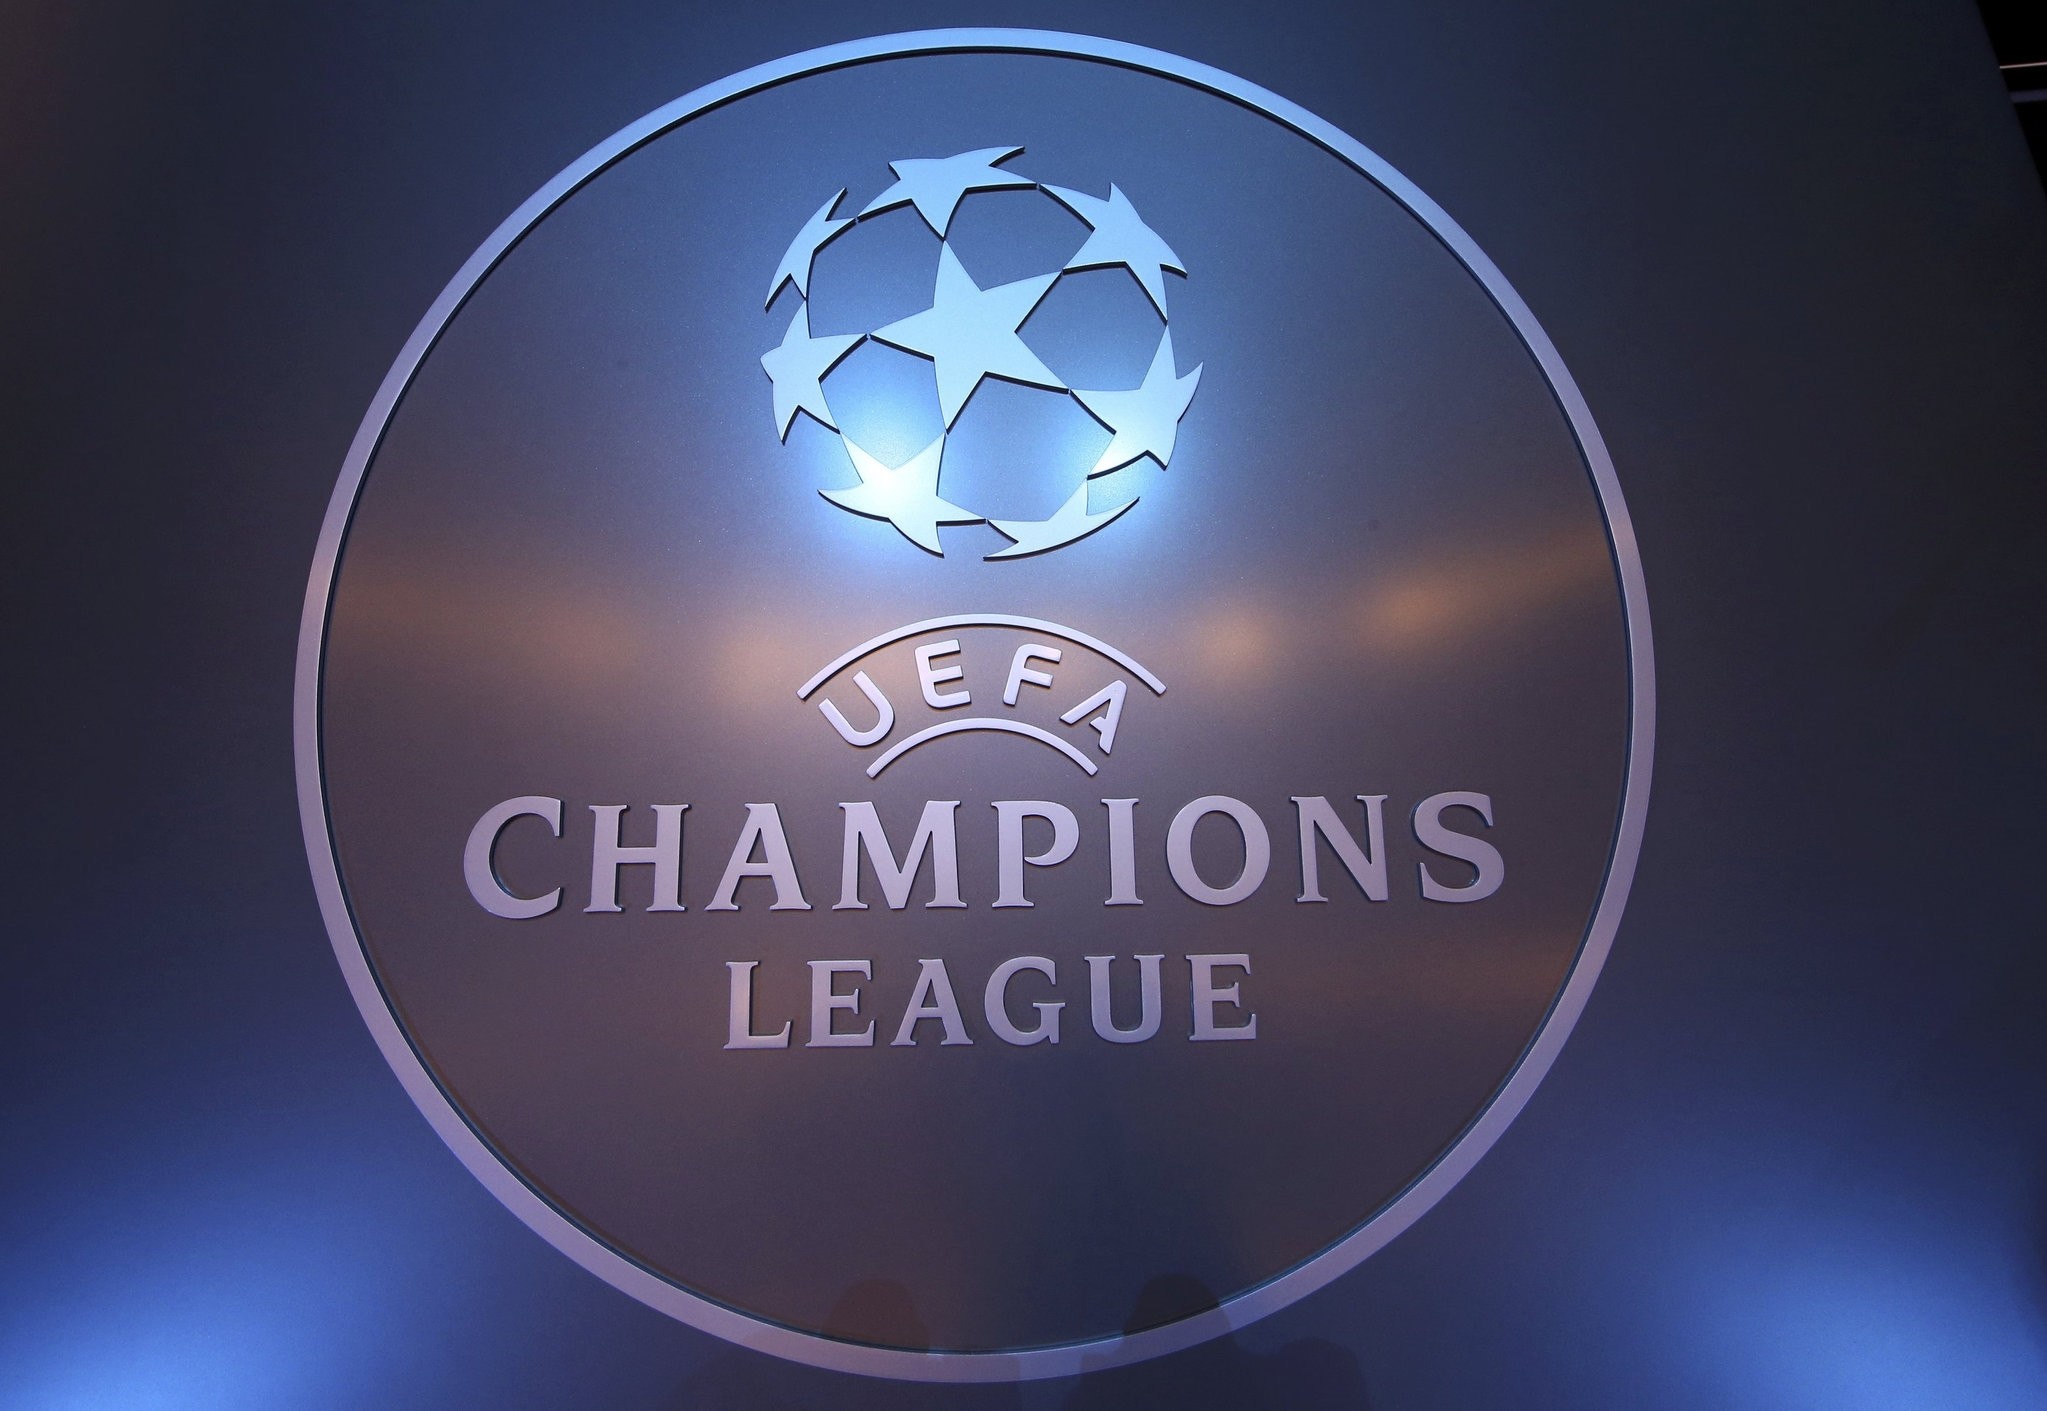 The UEFA logo is seen before the draw ceremony for the 2016/2017 Champions League Cup soccer competition at Monaco's Grimaldi Forum in Monaco August 25, 2016. (Reuters Photo)